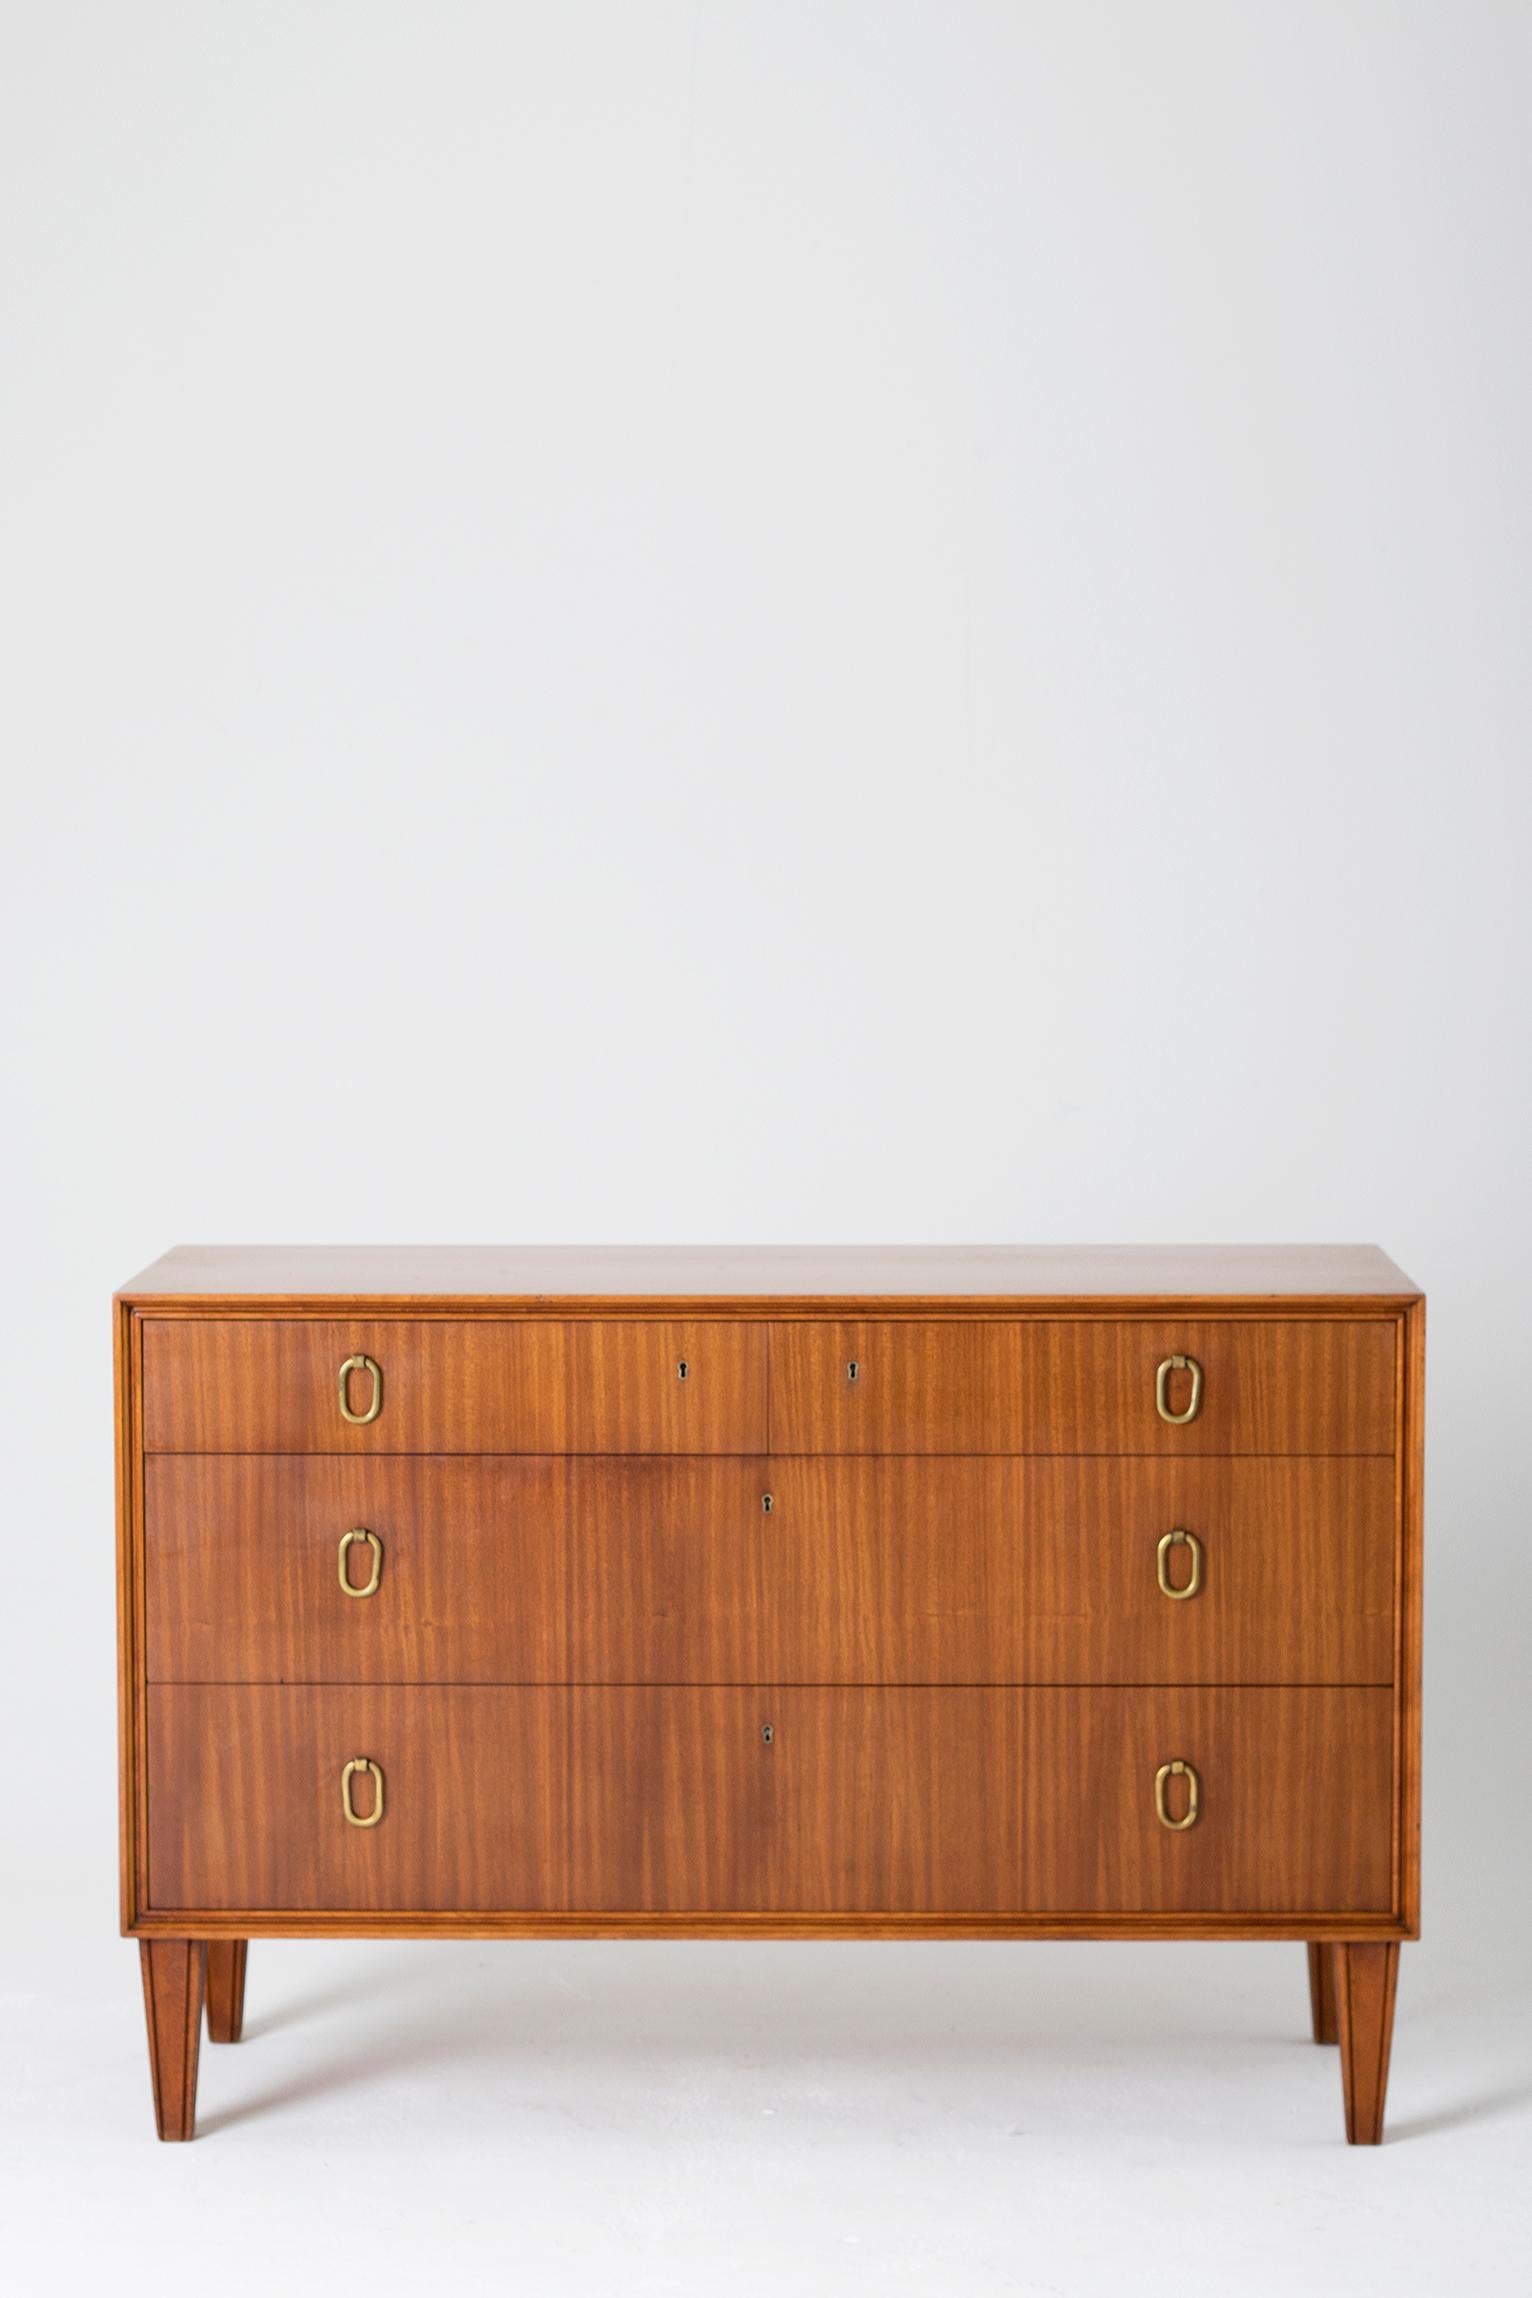 A mahogany and brass chest of drawers by Axel Larsson (1898-1975) for Bodafors,
Sweden, late 1950s.